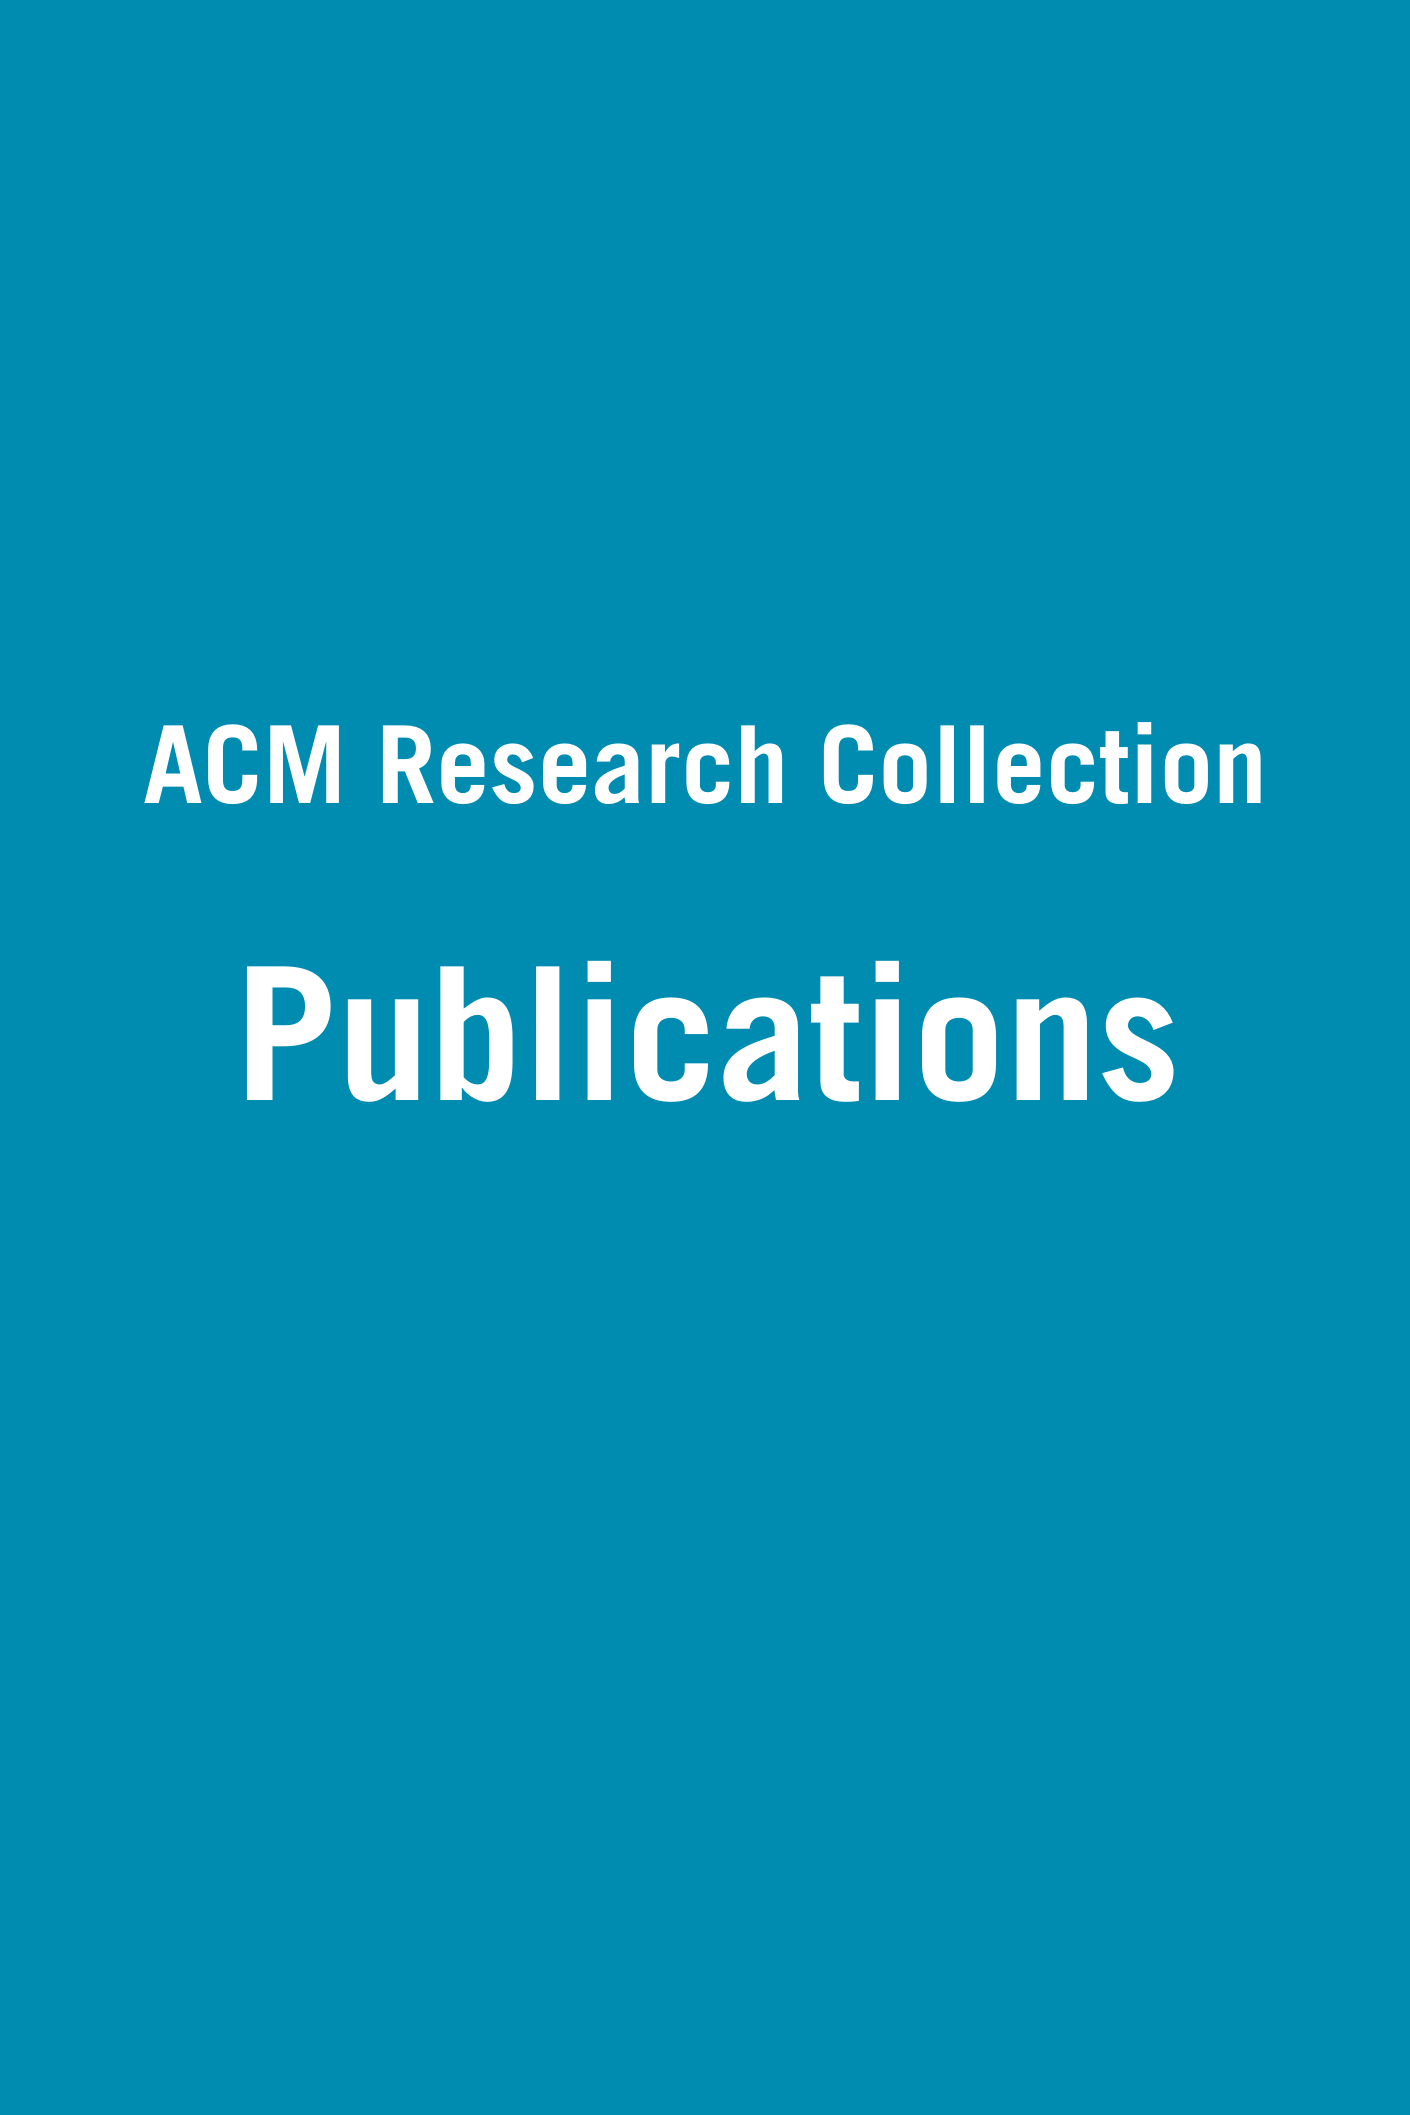 blue background with white text reads ACM Research Collection Publications